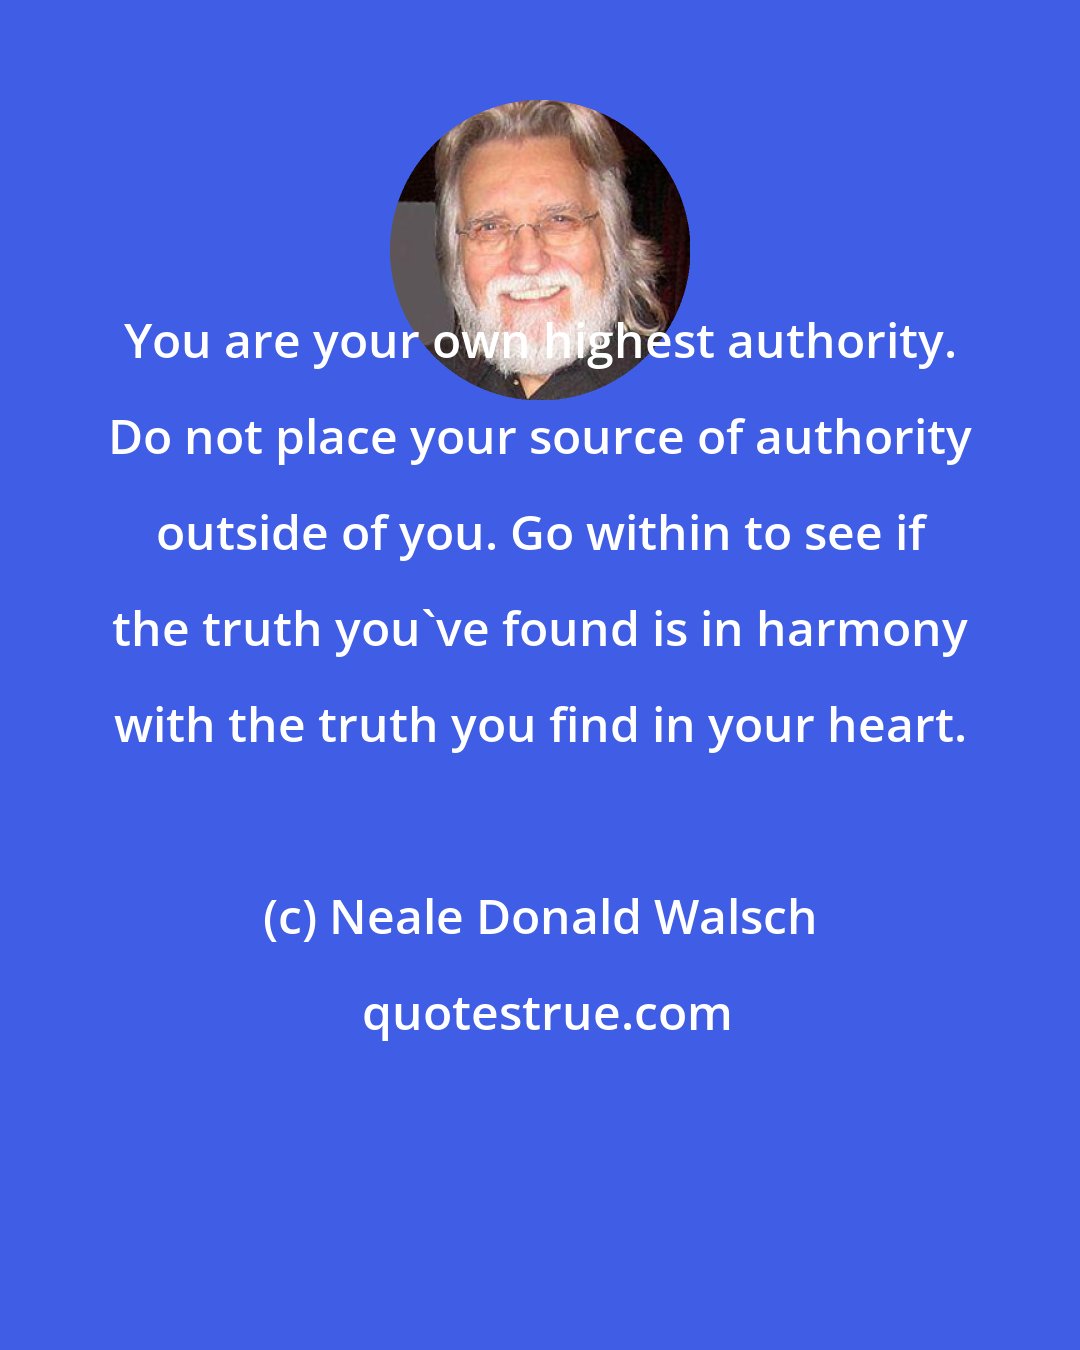 Neale Donald Walsch: You are your own highest authority. Do not place your source of authority outside of you. Go within to see if the truth you've found is in harmony with the truth you find in your heart.